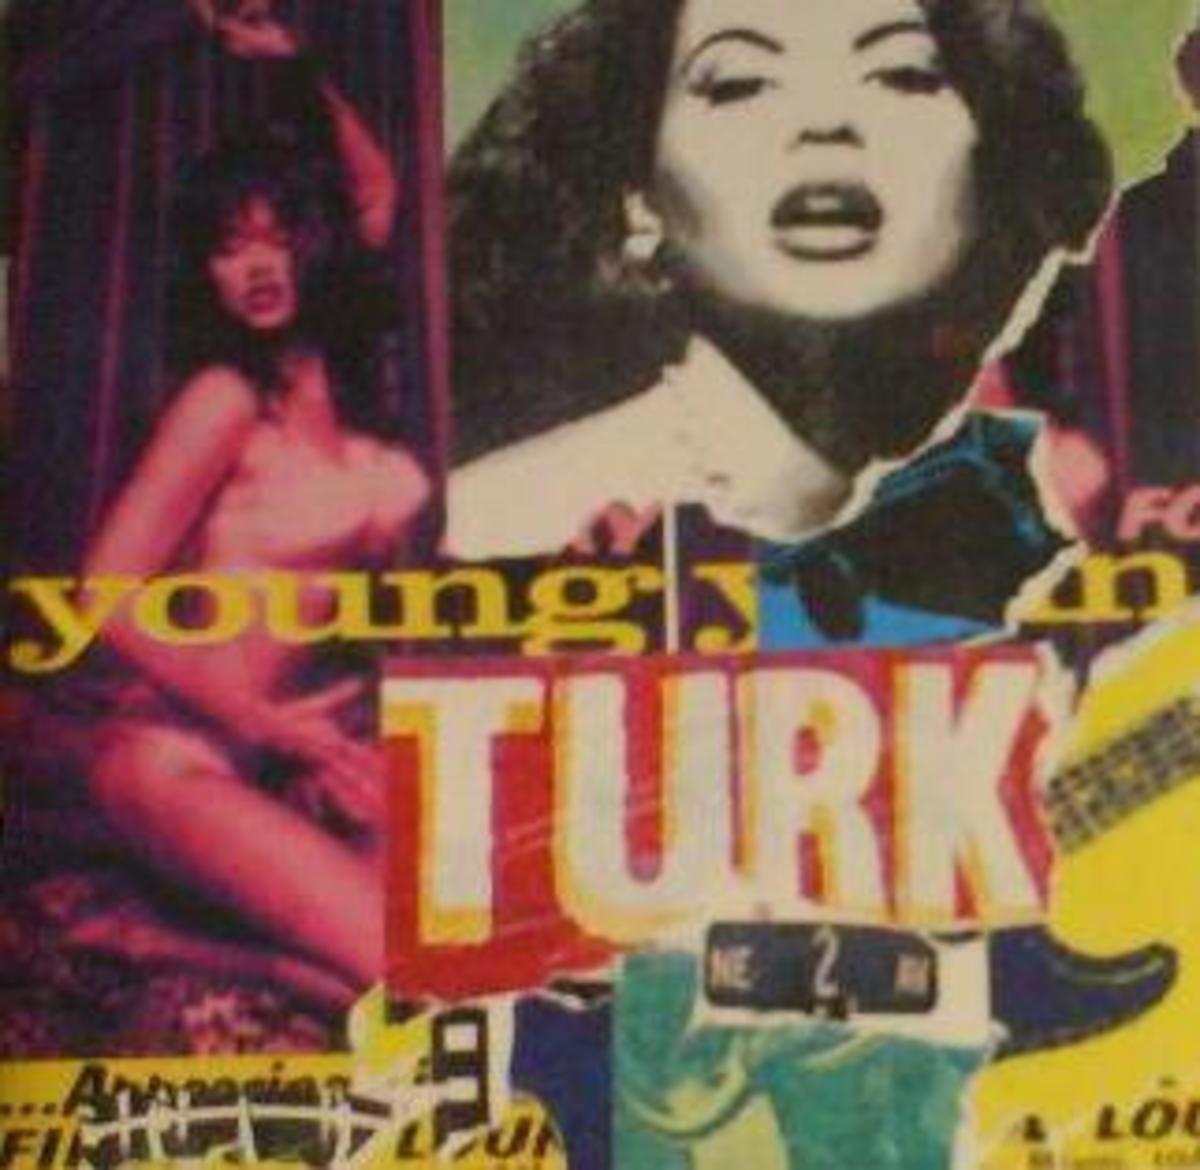 10 Albums You Need To Hear # 1: N.E. 2nd Ave. by Young Turk